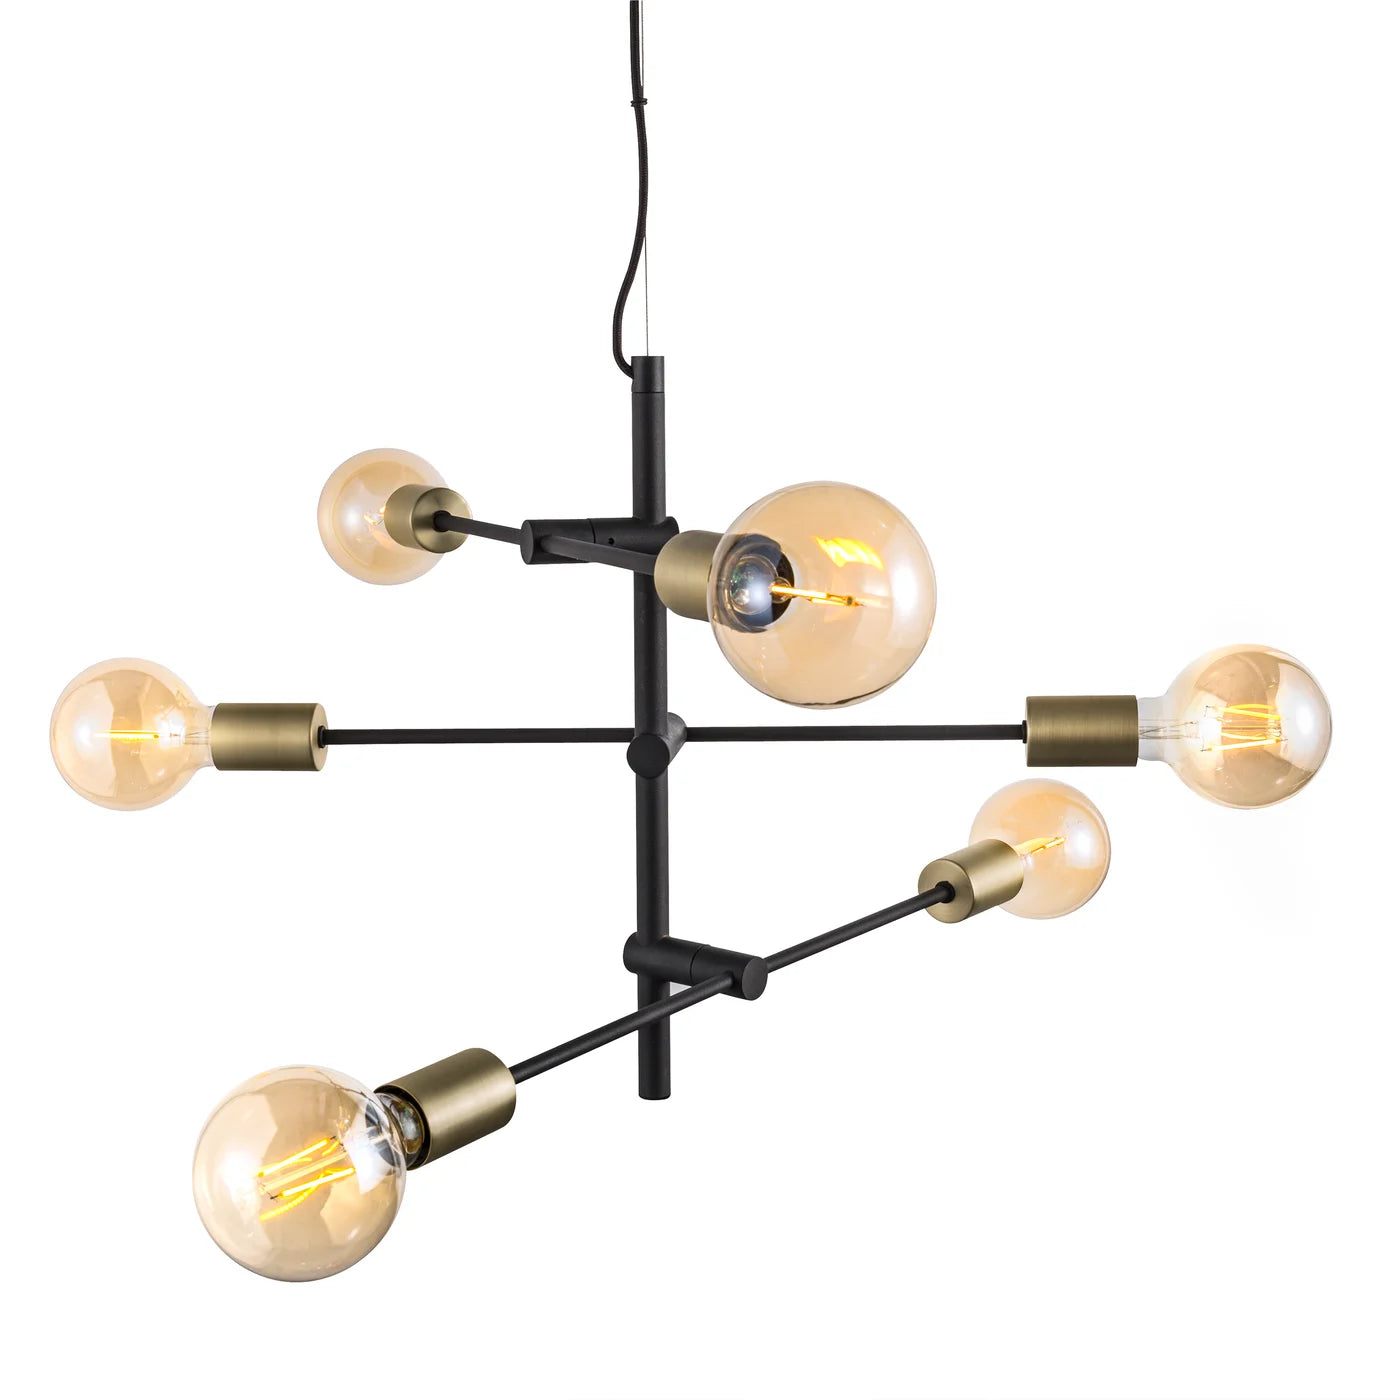 JOSEFINE pendant lamp in black with gold details